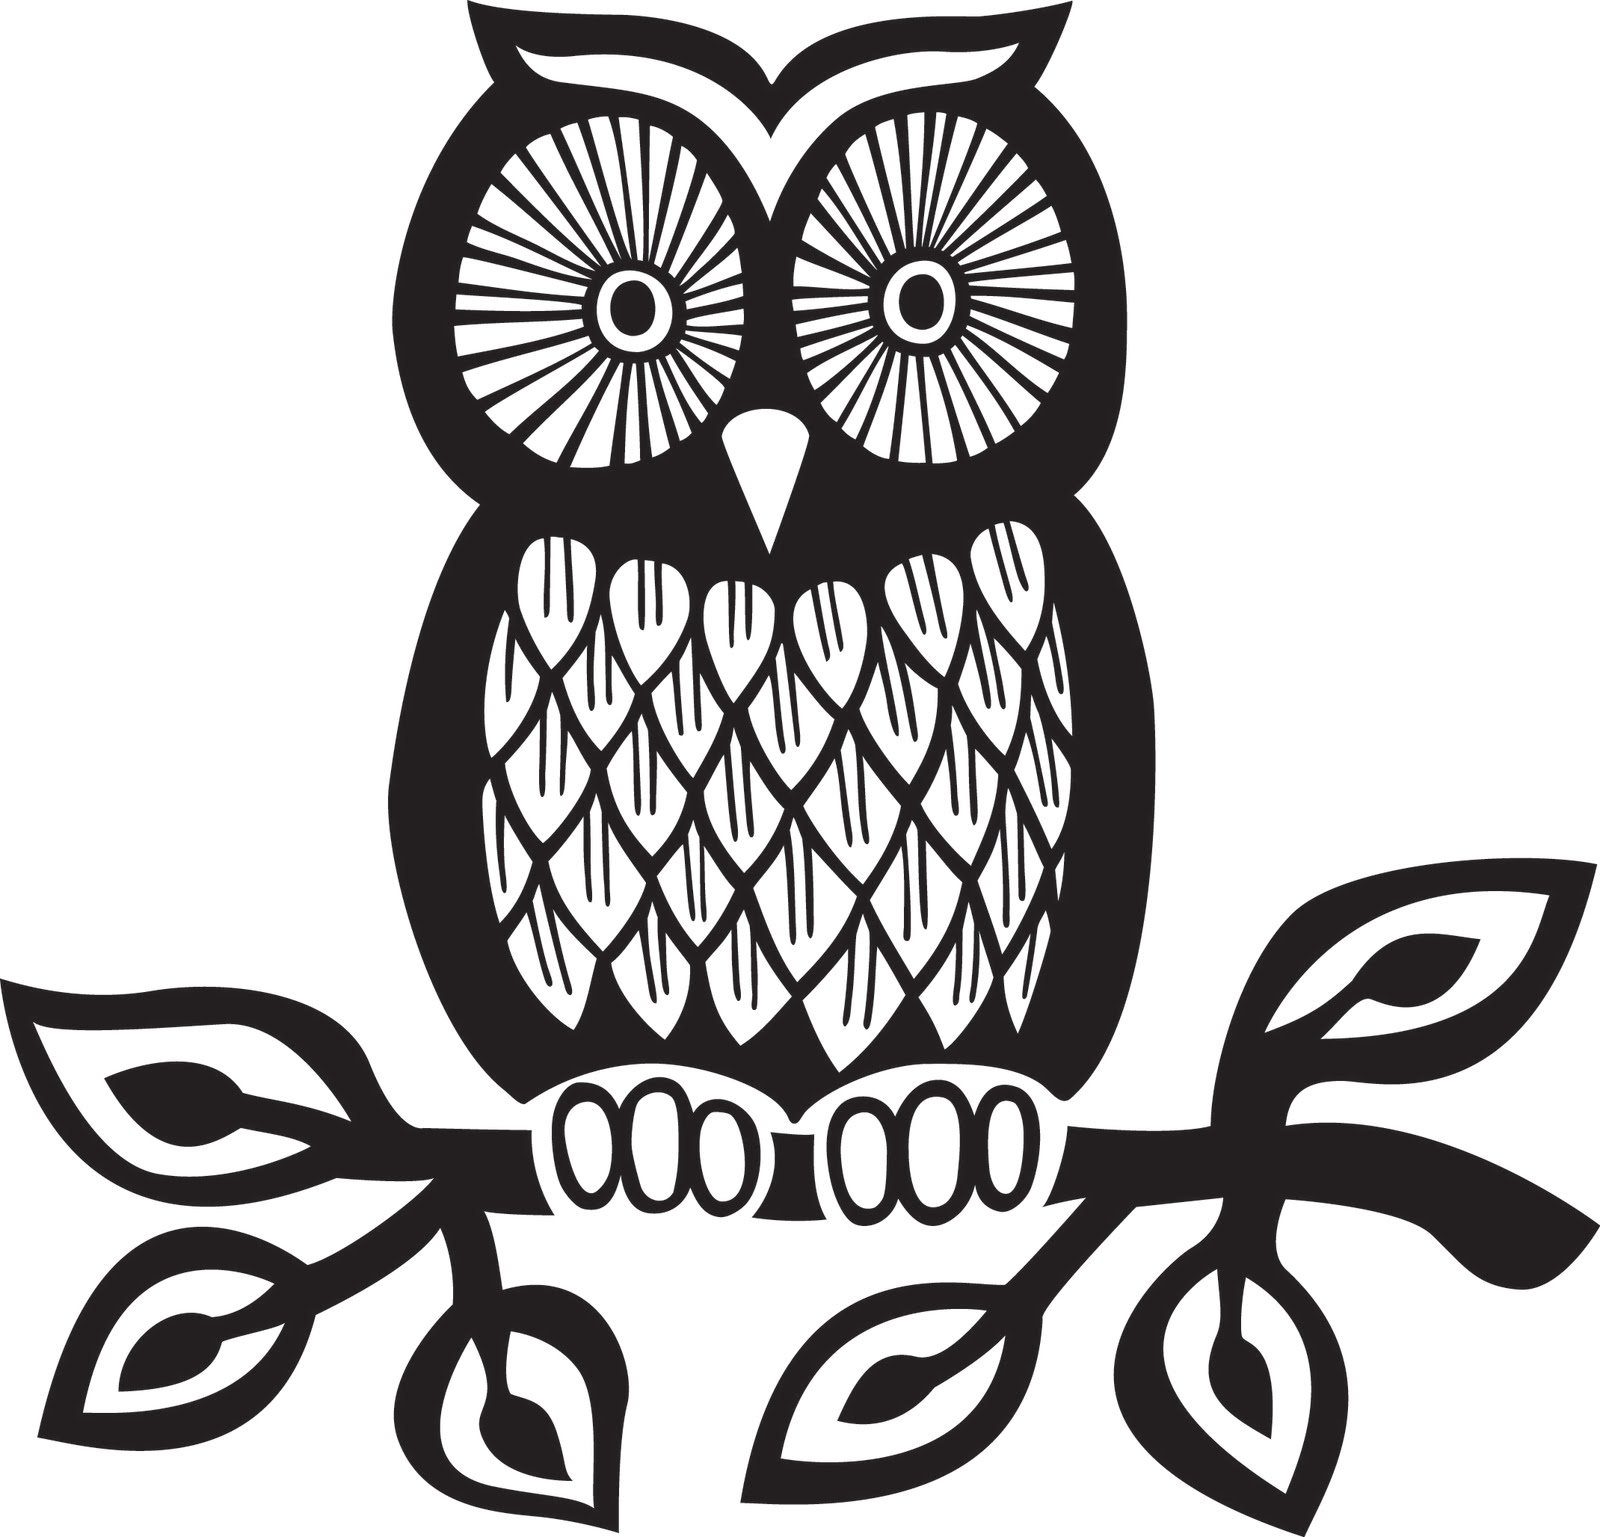 Best Photos of Owl Outline Designs - Owl Tattoo Outline Drawings ...